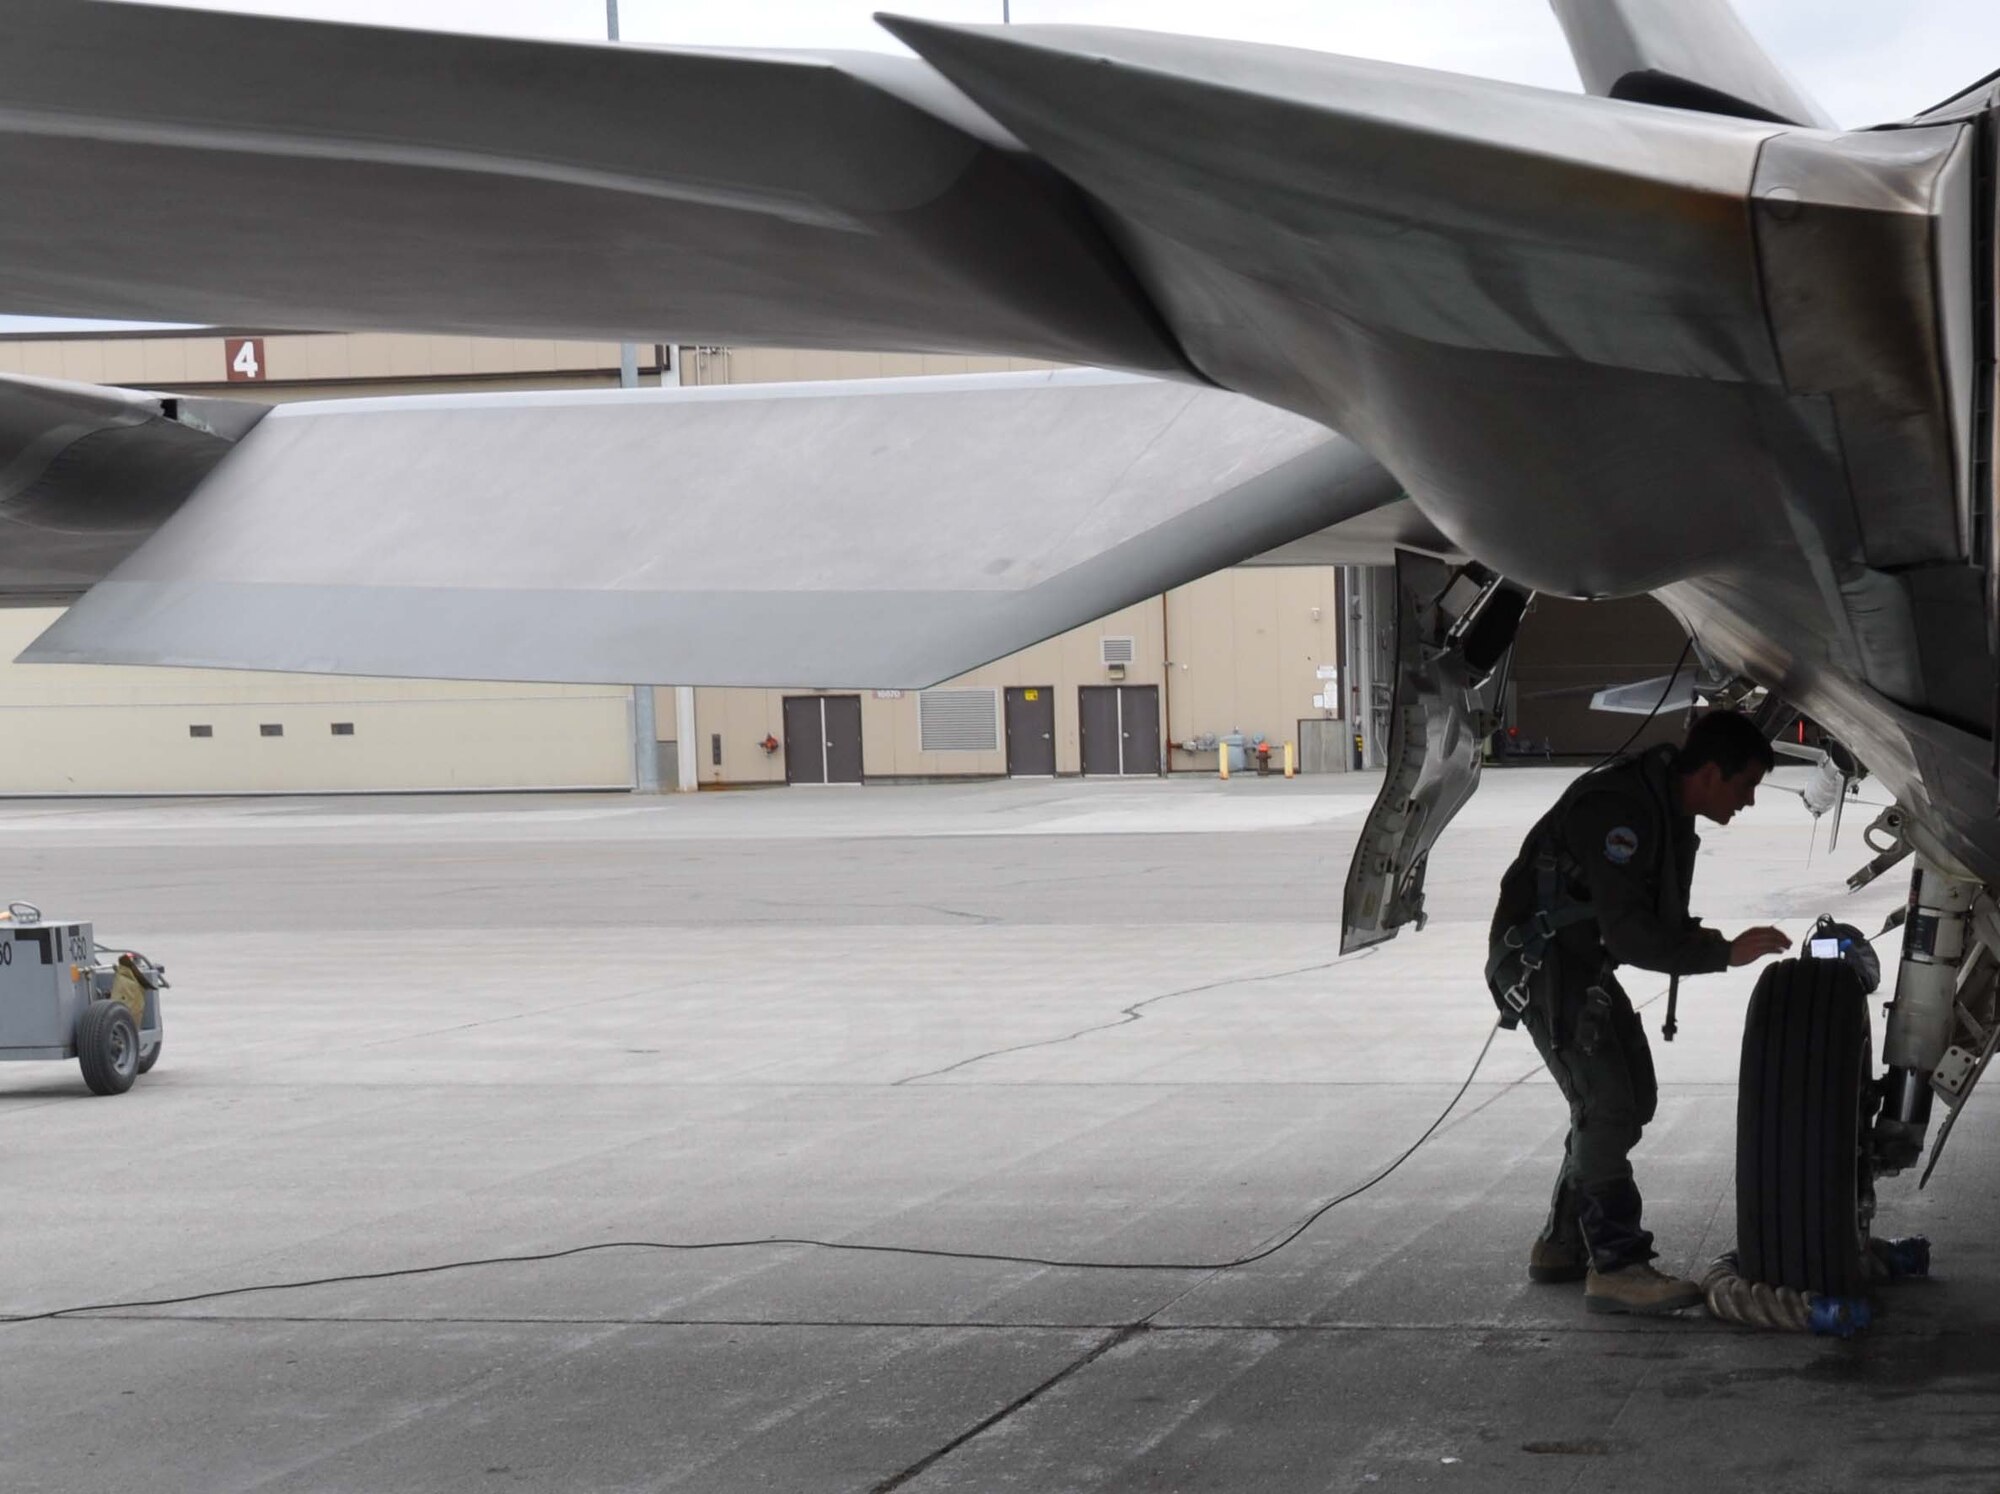 Maj. Wade Bridges, Reserve F-22 pilot assigned to the 302nd Fighter Squadron, conducts a pre-flight inspection of his F-22 here July 18. Bridges splits his time between flying the F-22 for Alaska’s only Air Force Reserve unit and a Boeing 737 for Alaska Airlines (U.S. Air Force/Capt. Ashley Conner)